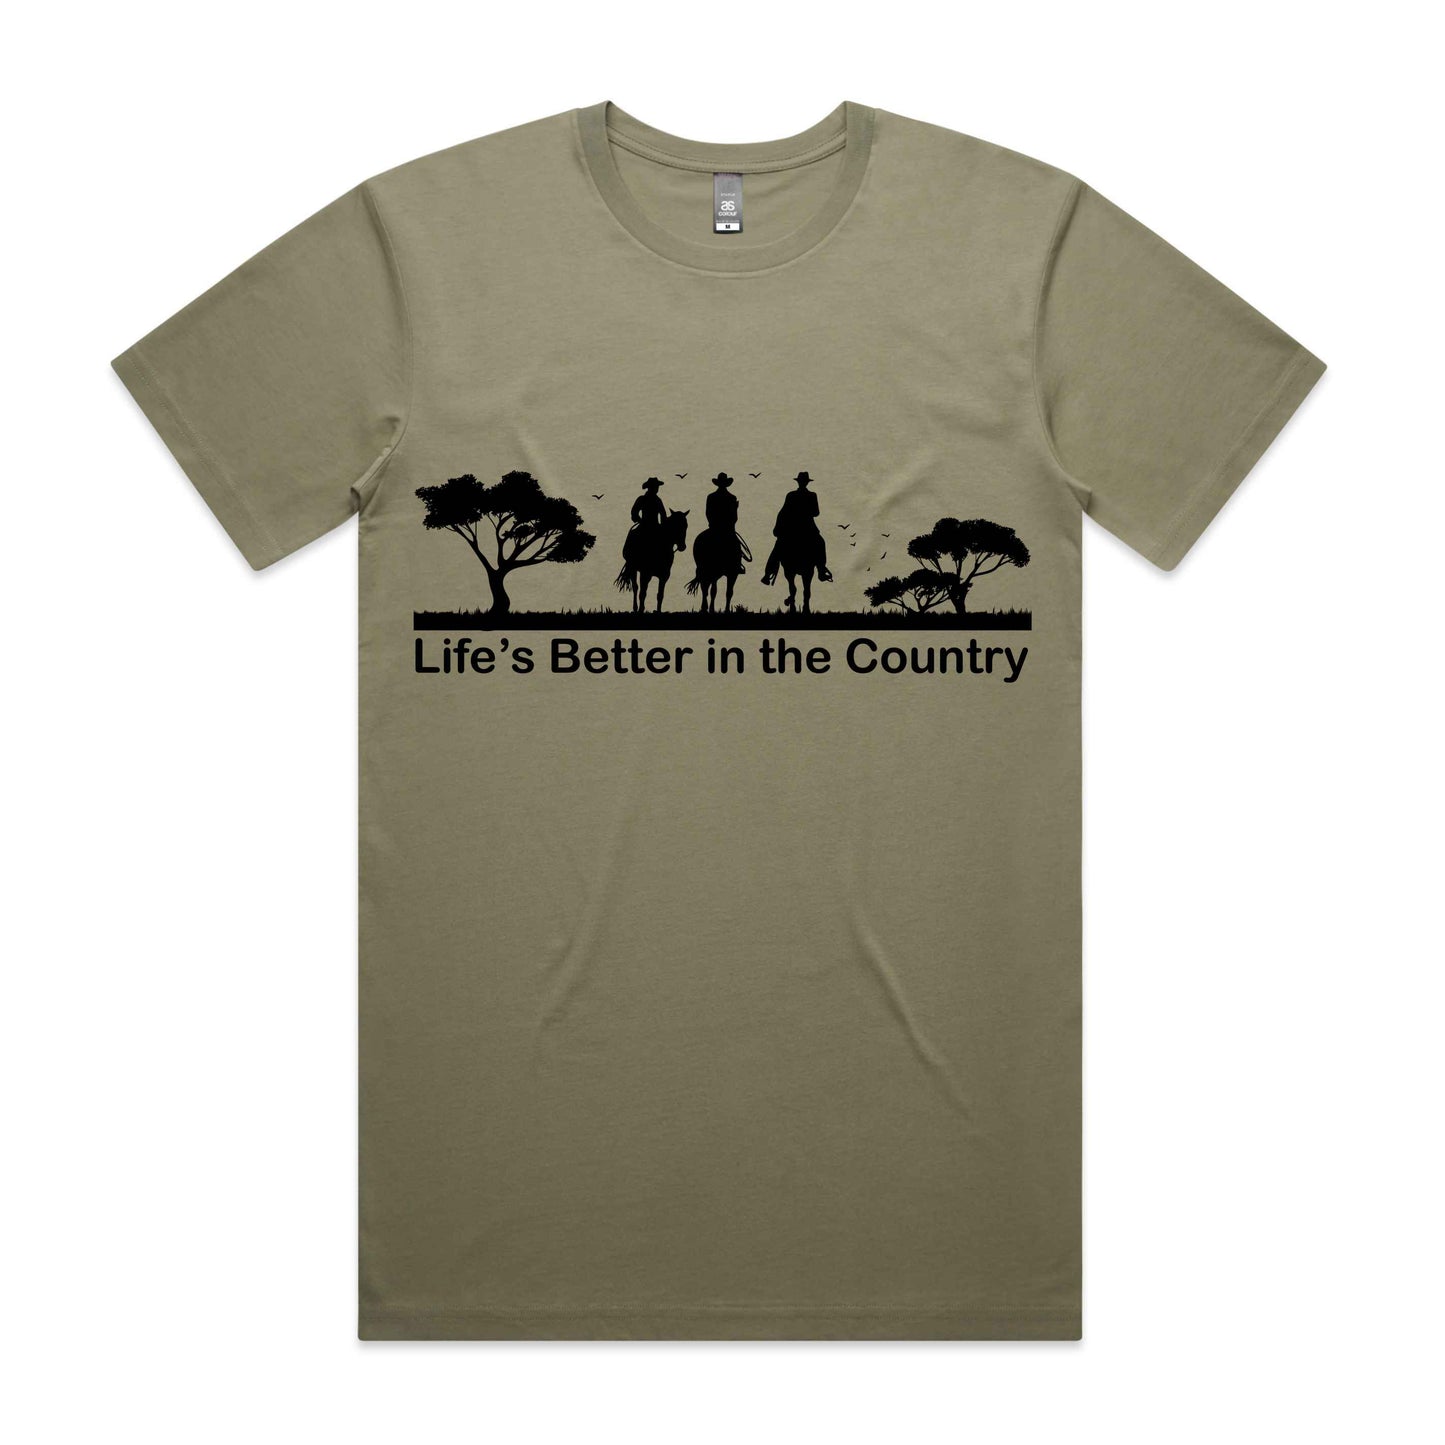 Hayco Men's Life's Better in the Country